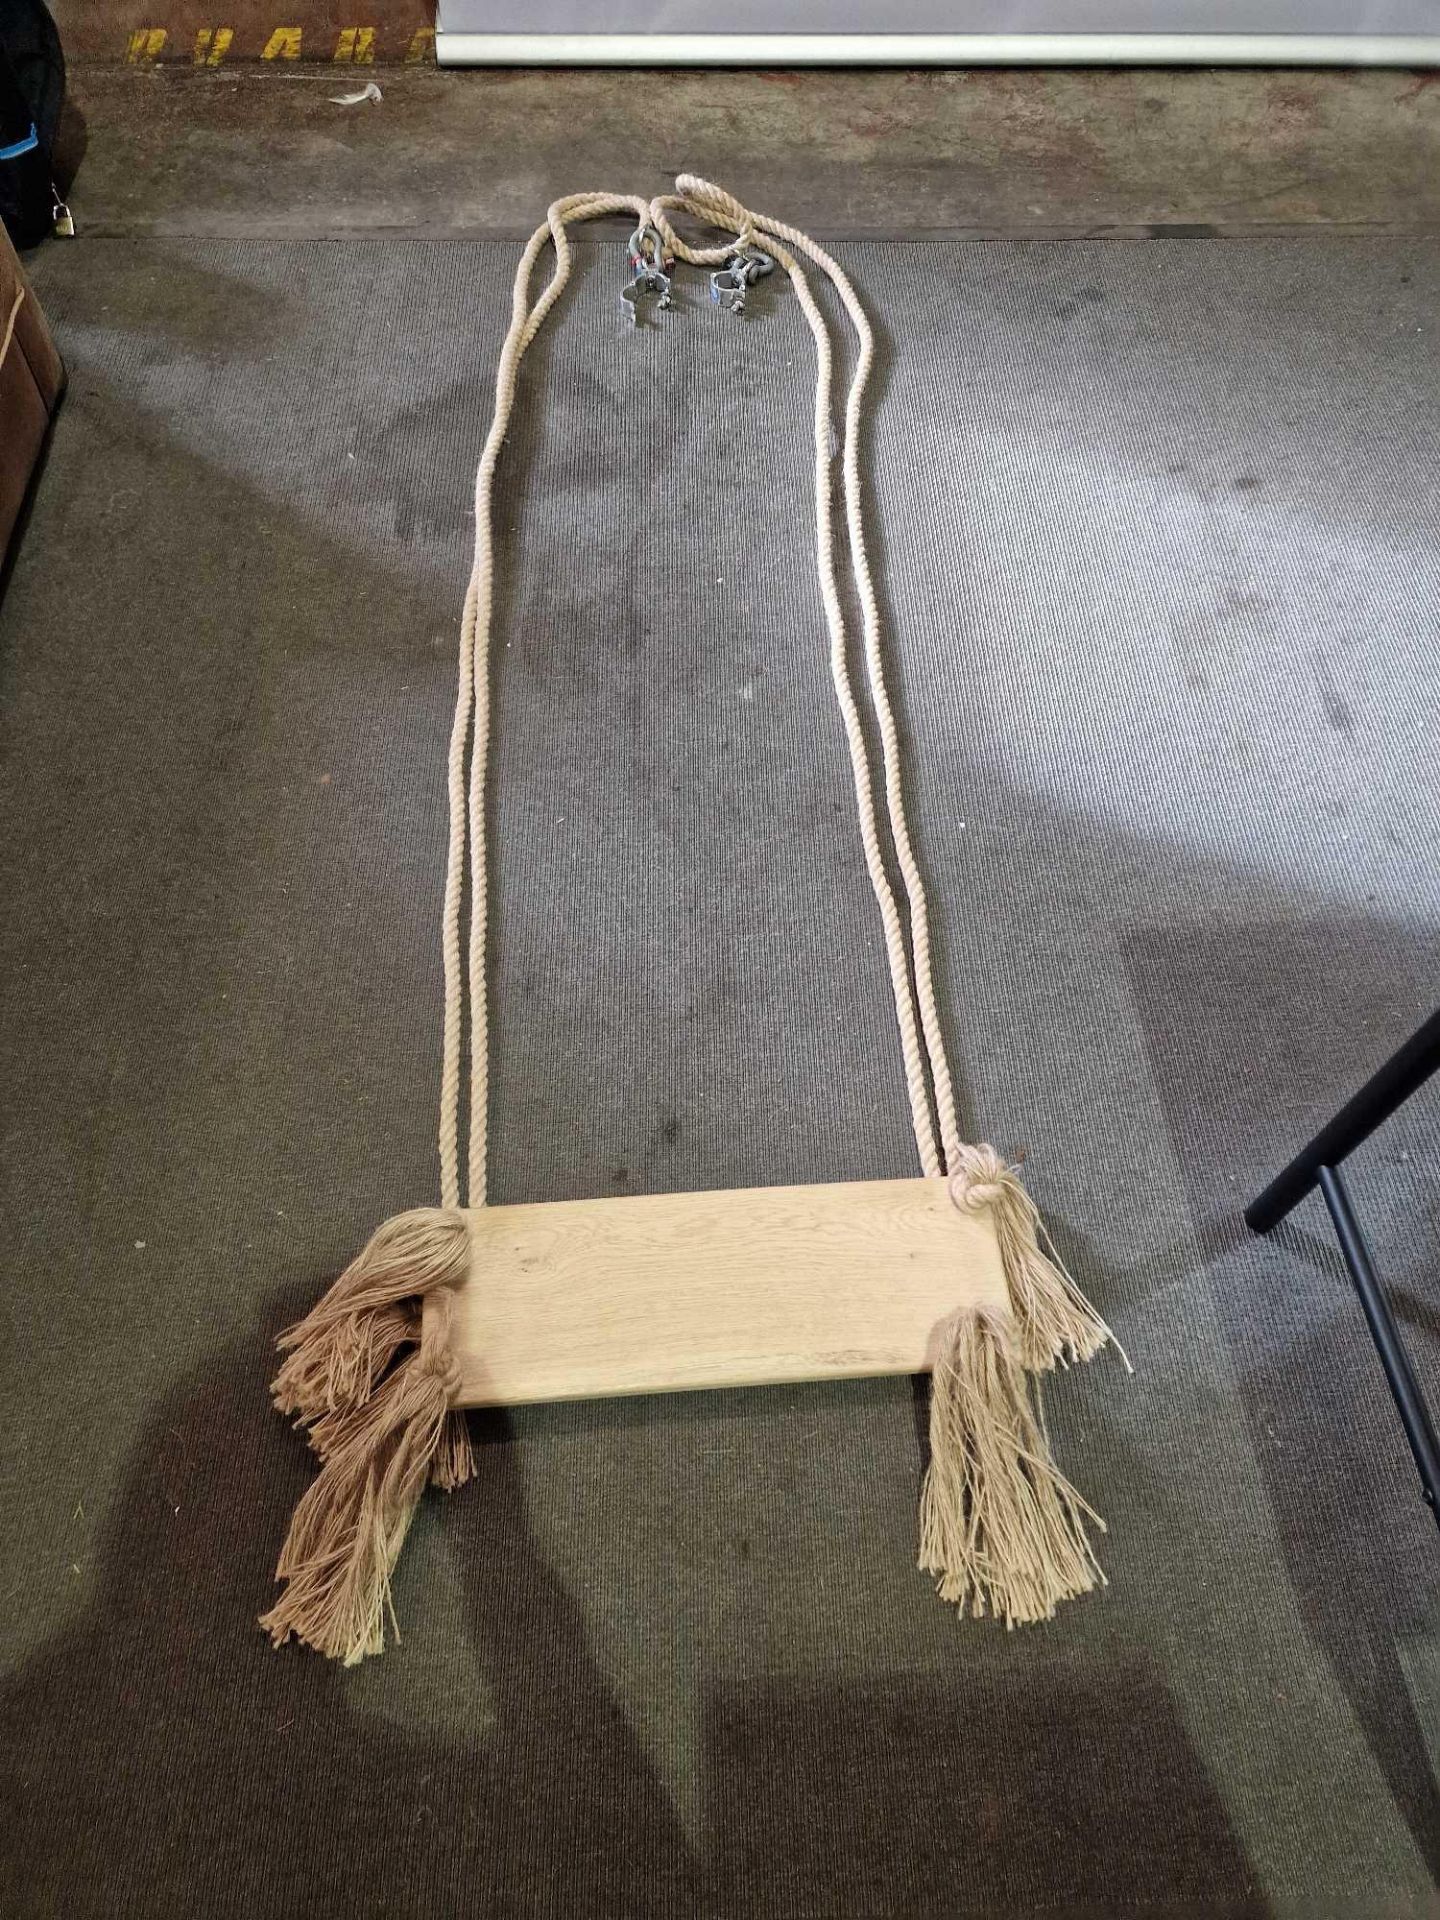 2 x Medium Wooden Rope Swing 60 x 20 x 3cm Thick Natural Rope Product Complete With Clamps And - Image 2 of 3